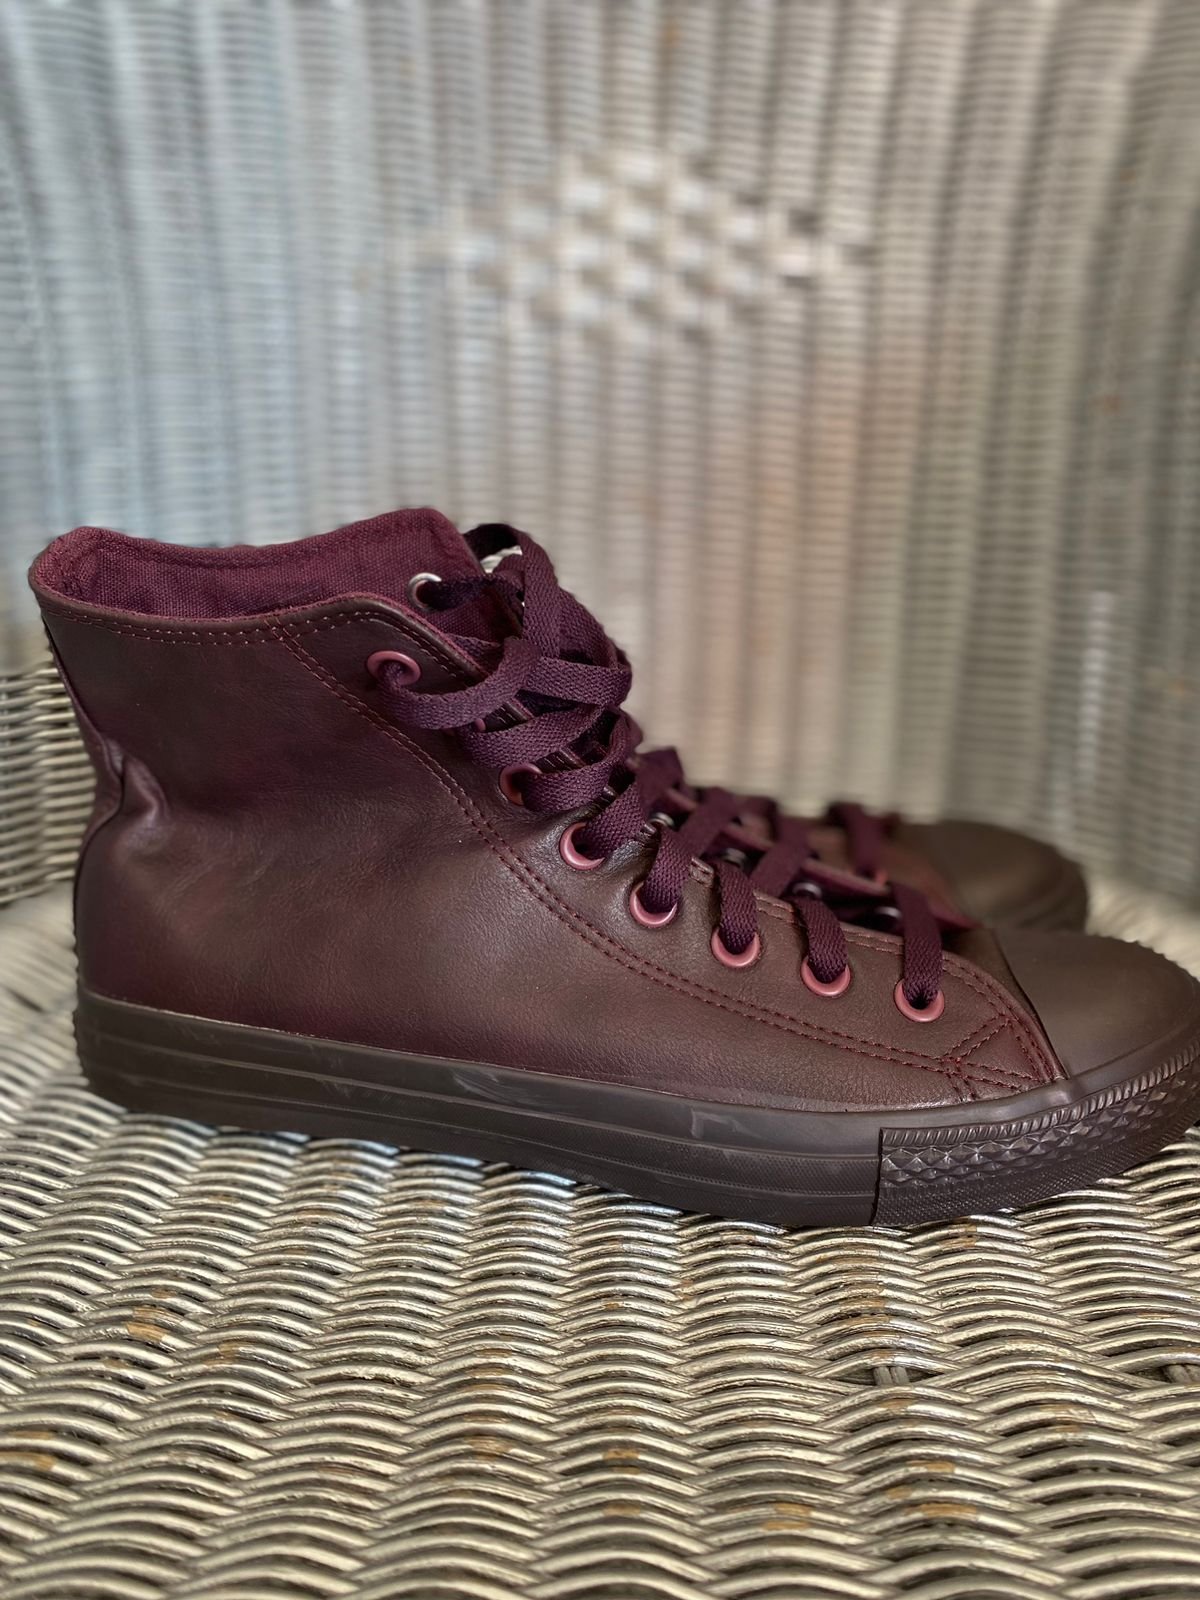 SOVIET Viper Hicut Sneakers in Burgundy – Size 9